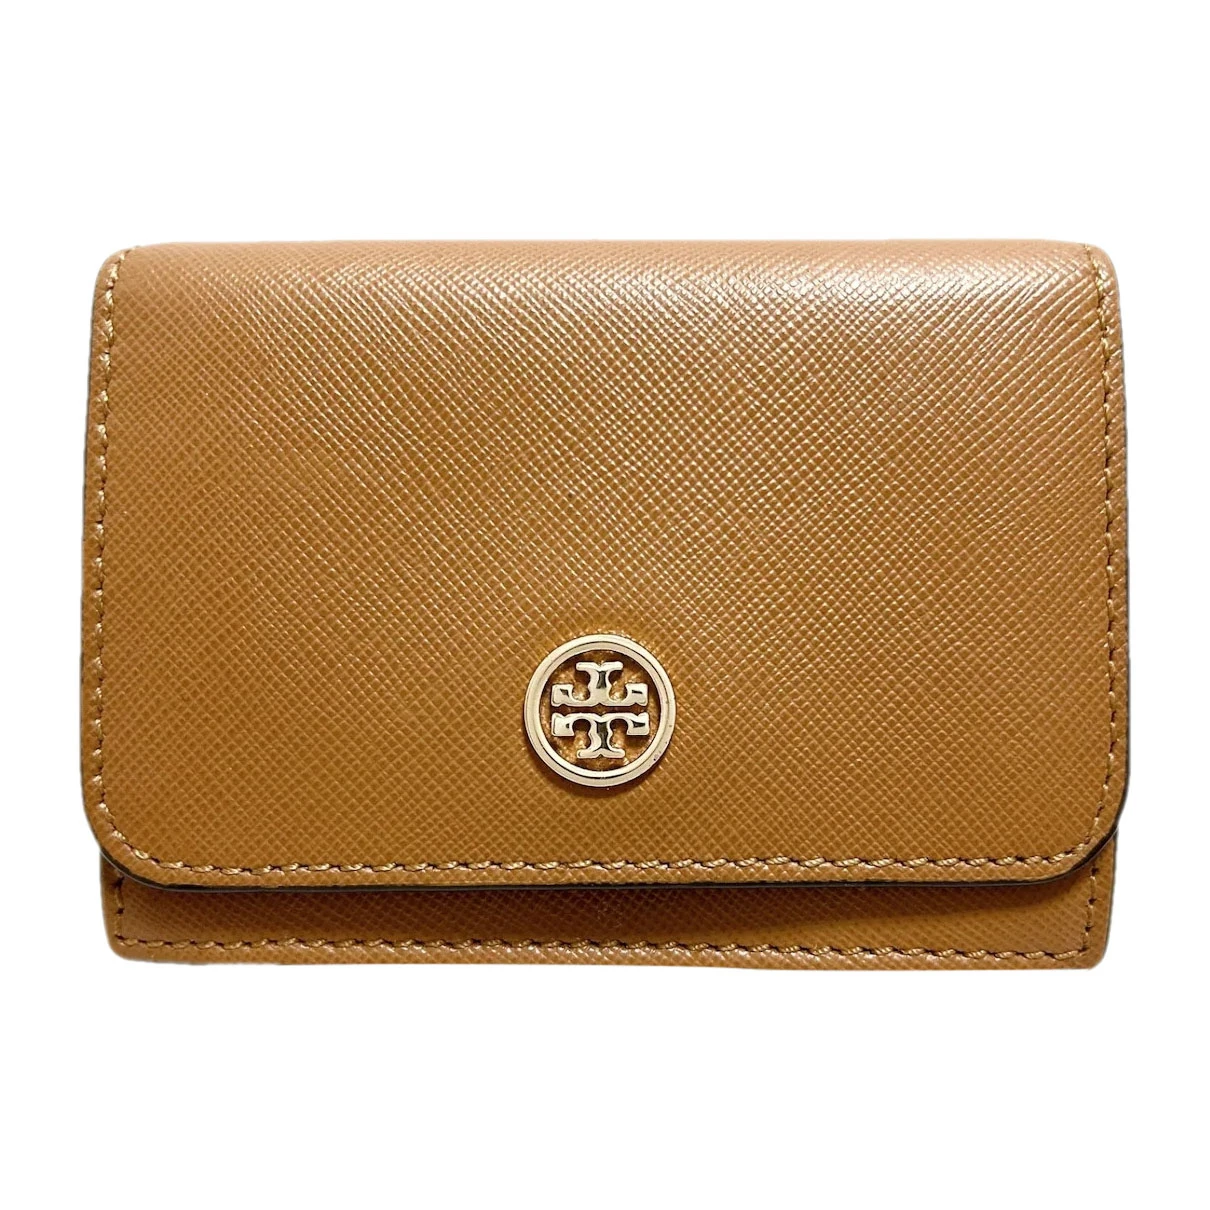 Pre-owned Tory Burch Leather Purse In Brown